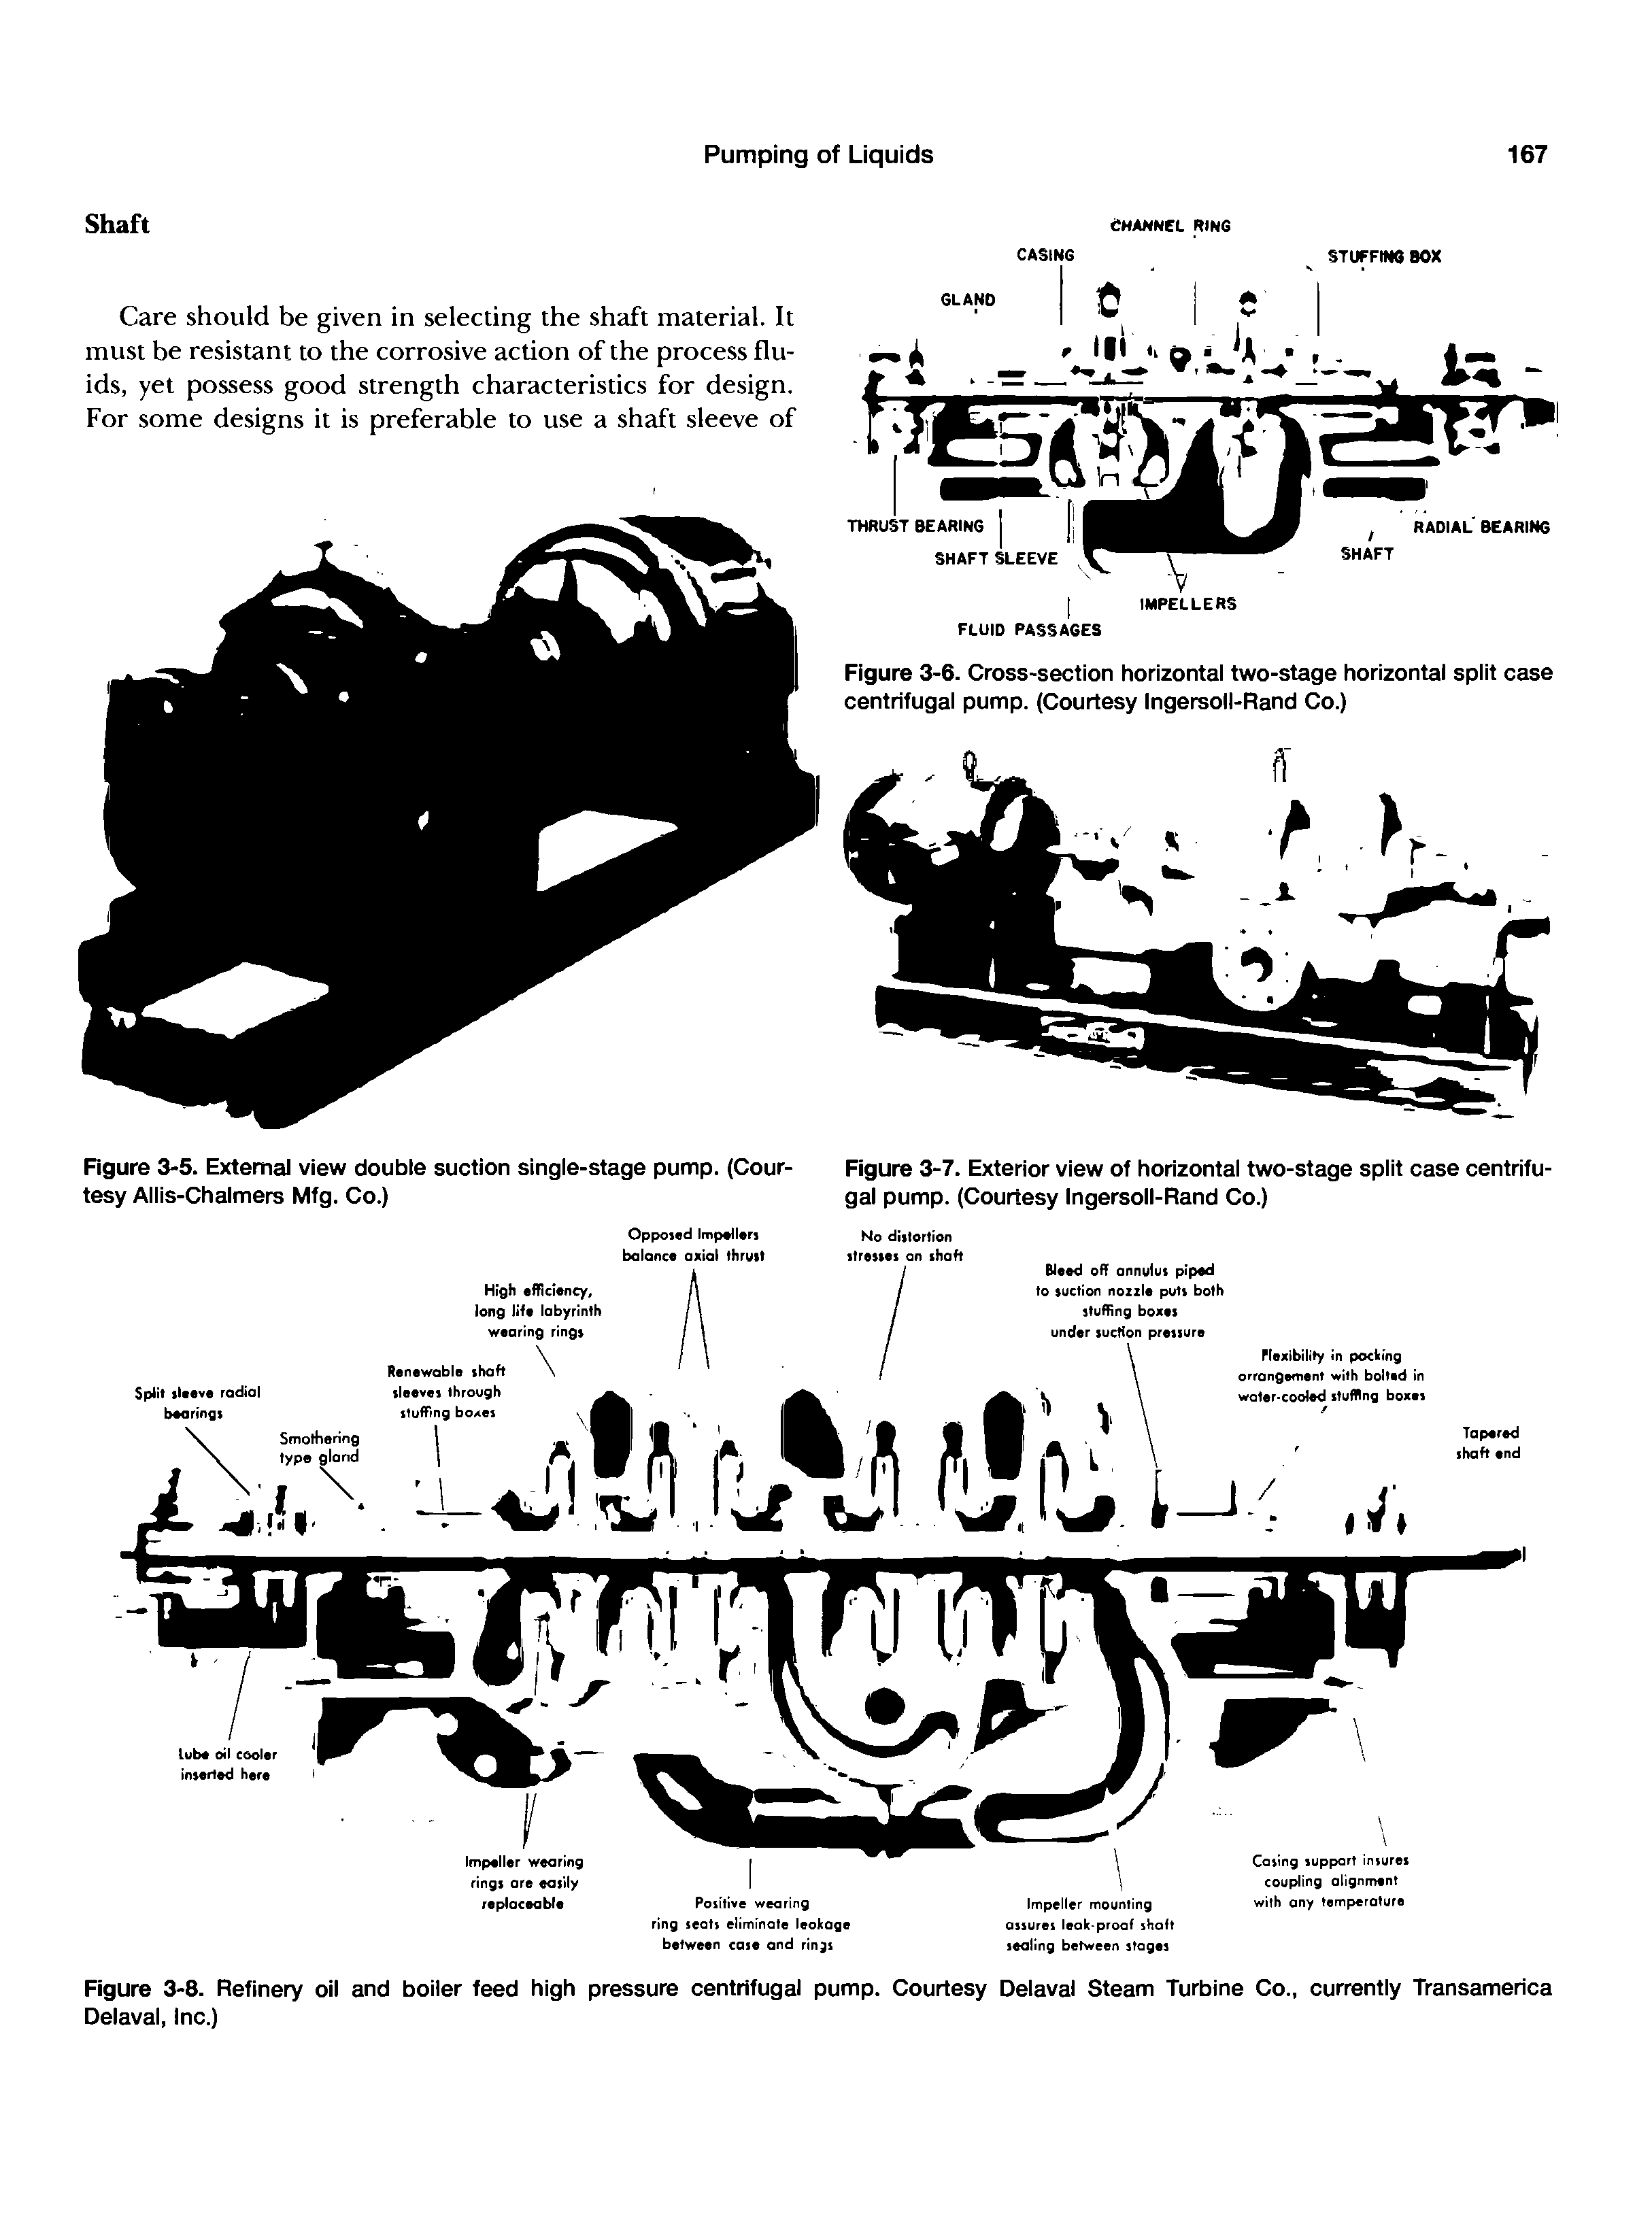 Figure 3-6. Cross-section horizontal two-stage horizontal split case centrifugal pump. (Courtesy Ingersoll-Rand Co.)...